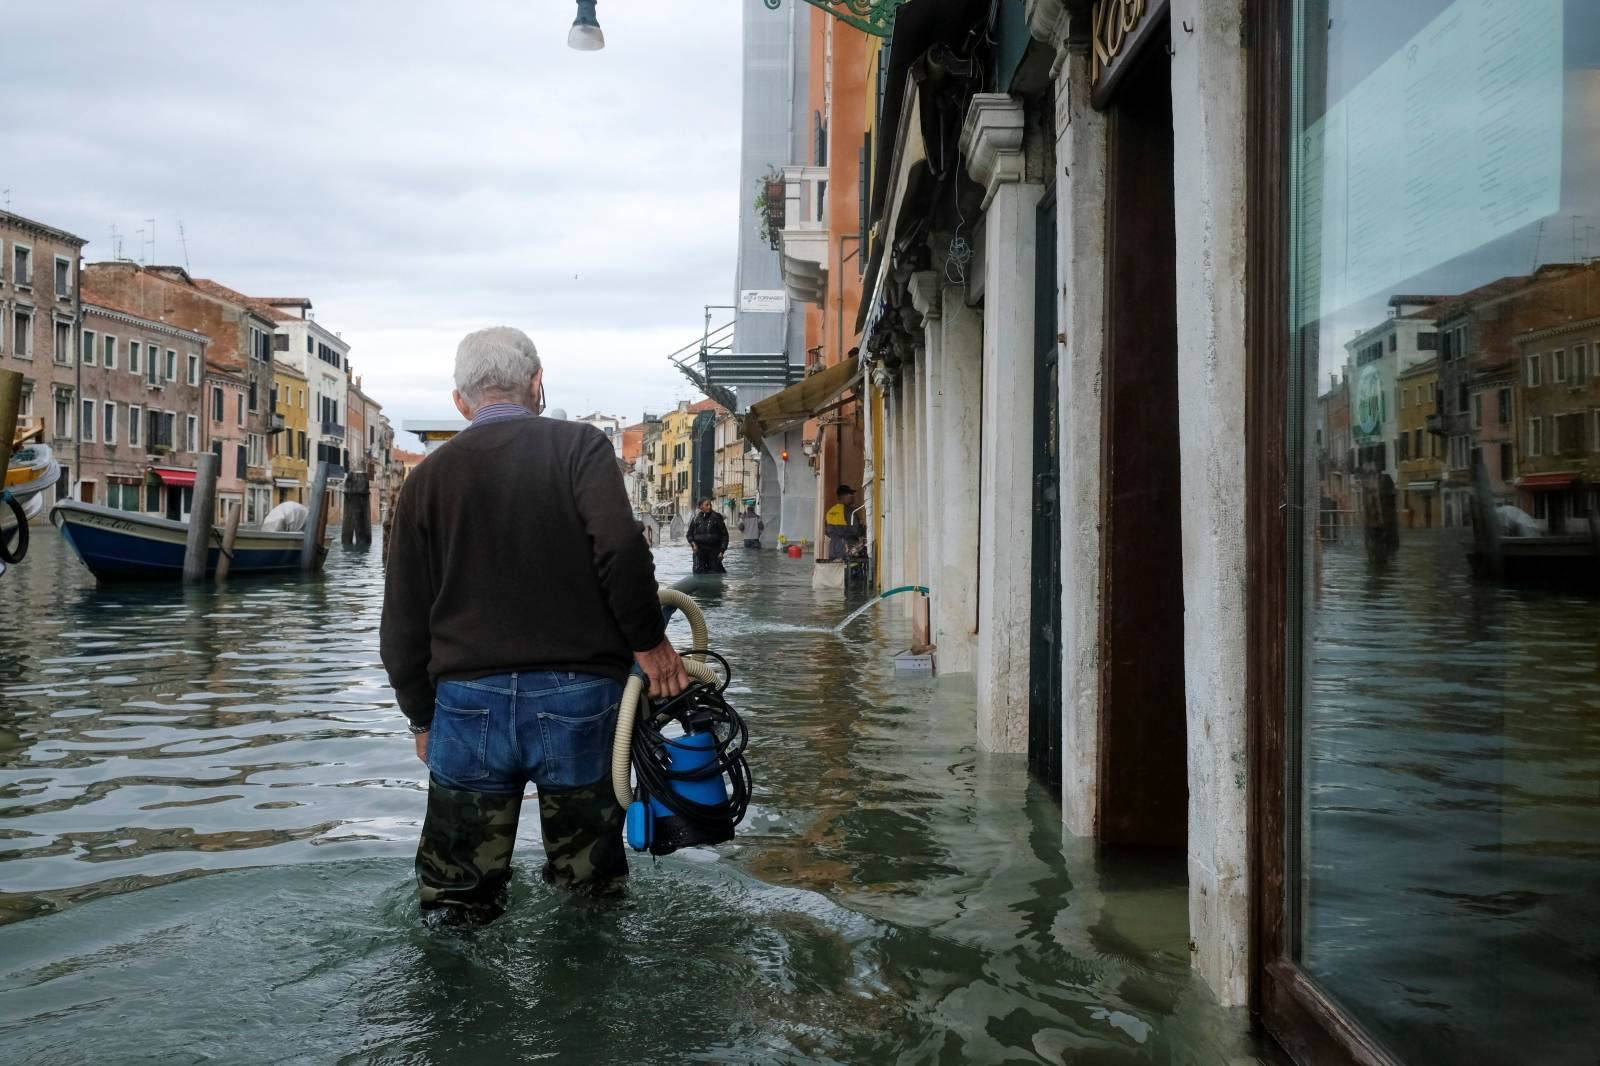 A man walks in the flooded street during a period of seasonal high water in Venice